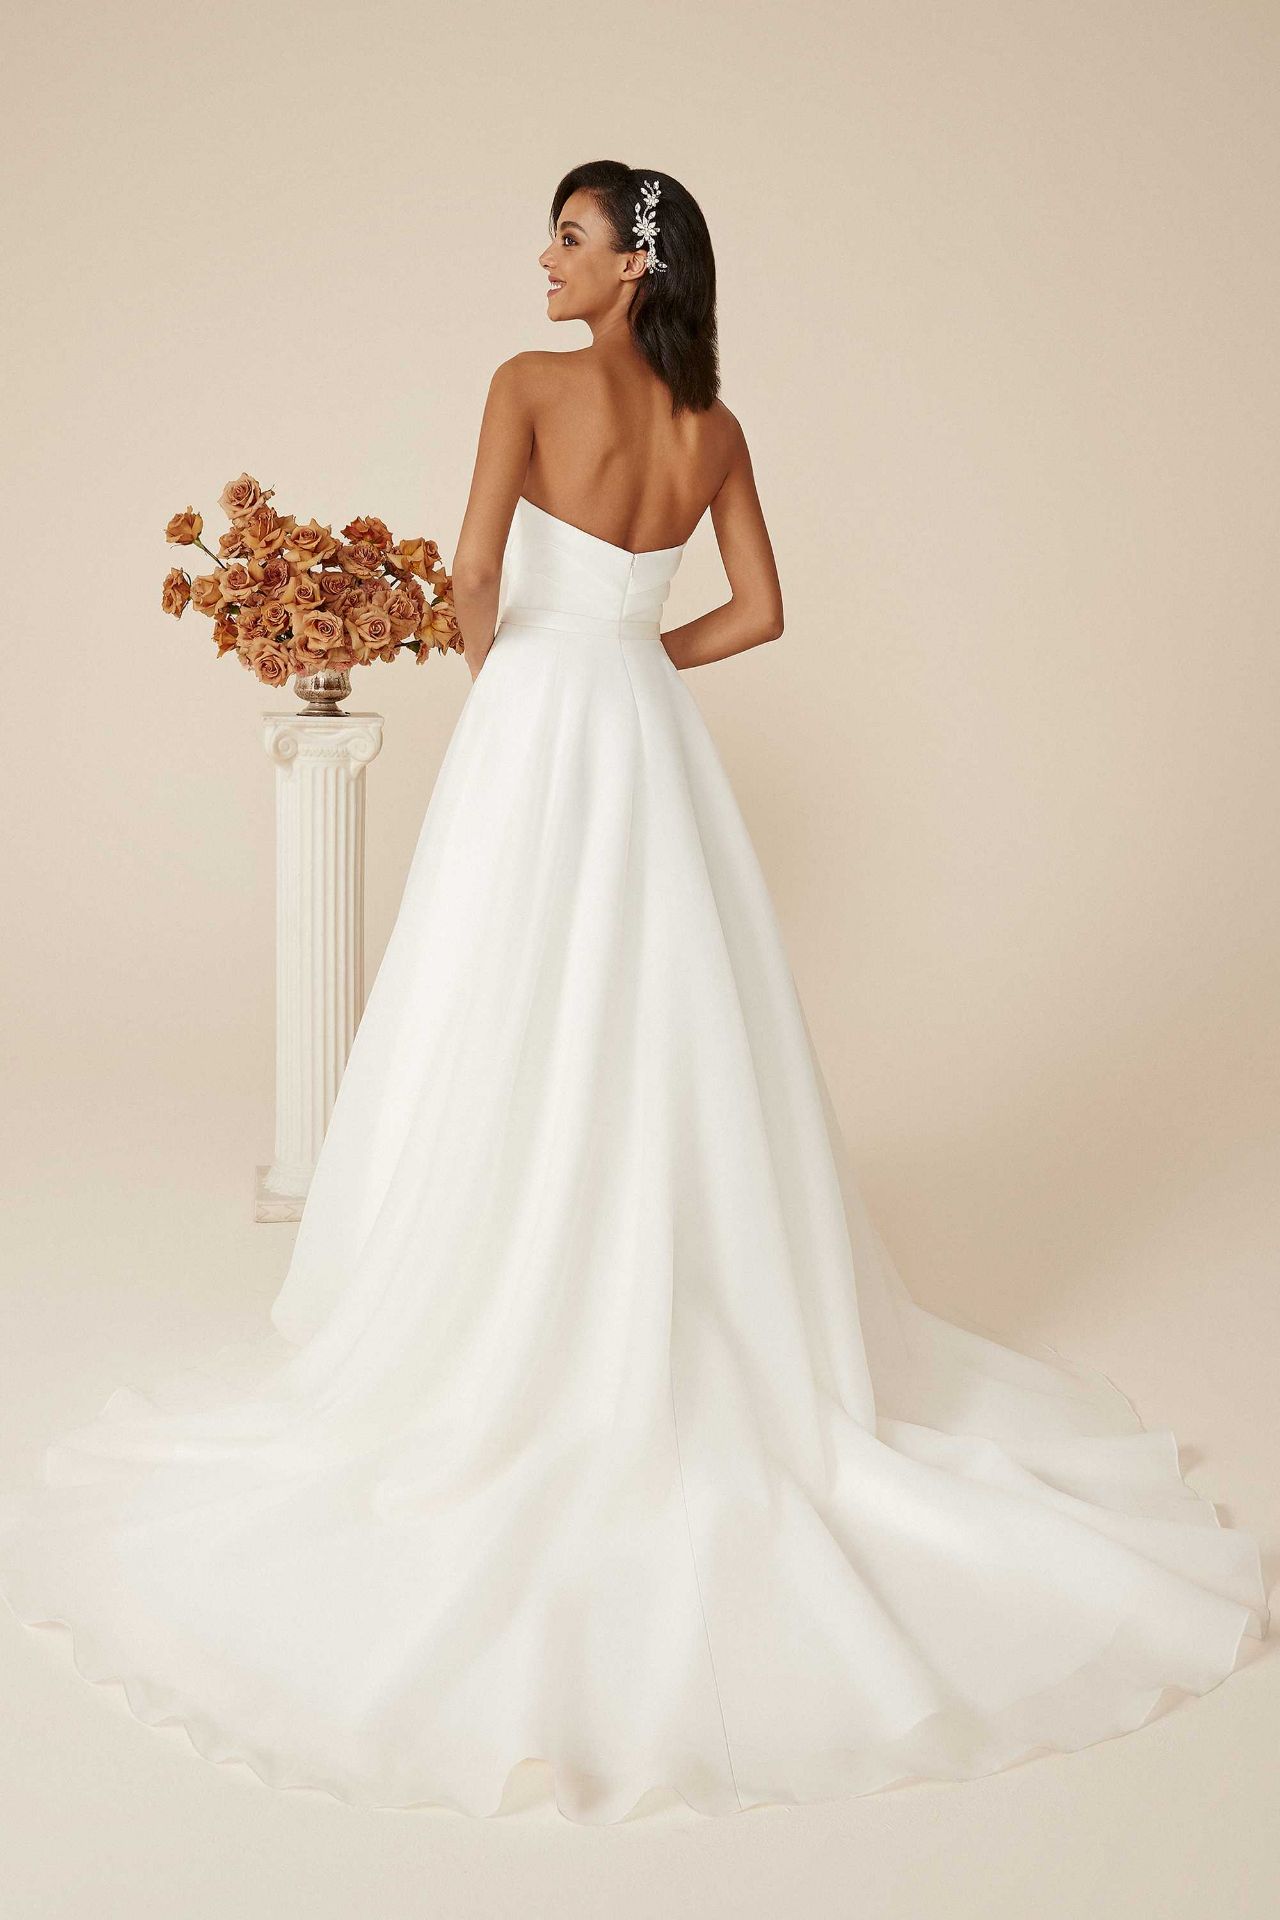 1 x Justin Alexander DURHAM Organdy A-Line Bridal Gown With Pleated Neckline - Size 10 - RRP £1,270 - Image 3 of 7